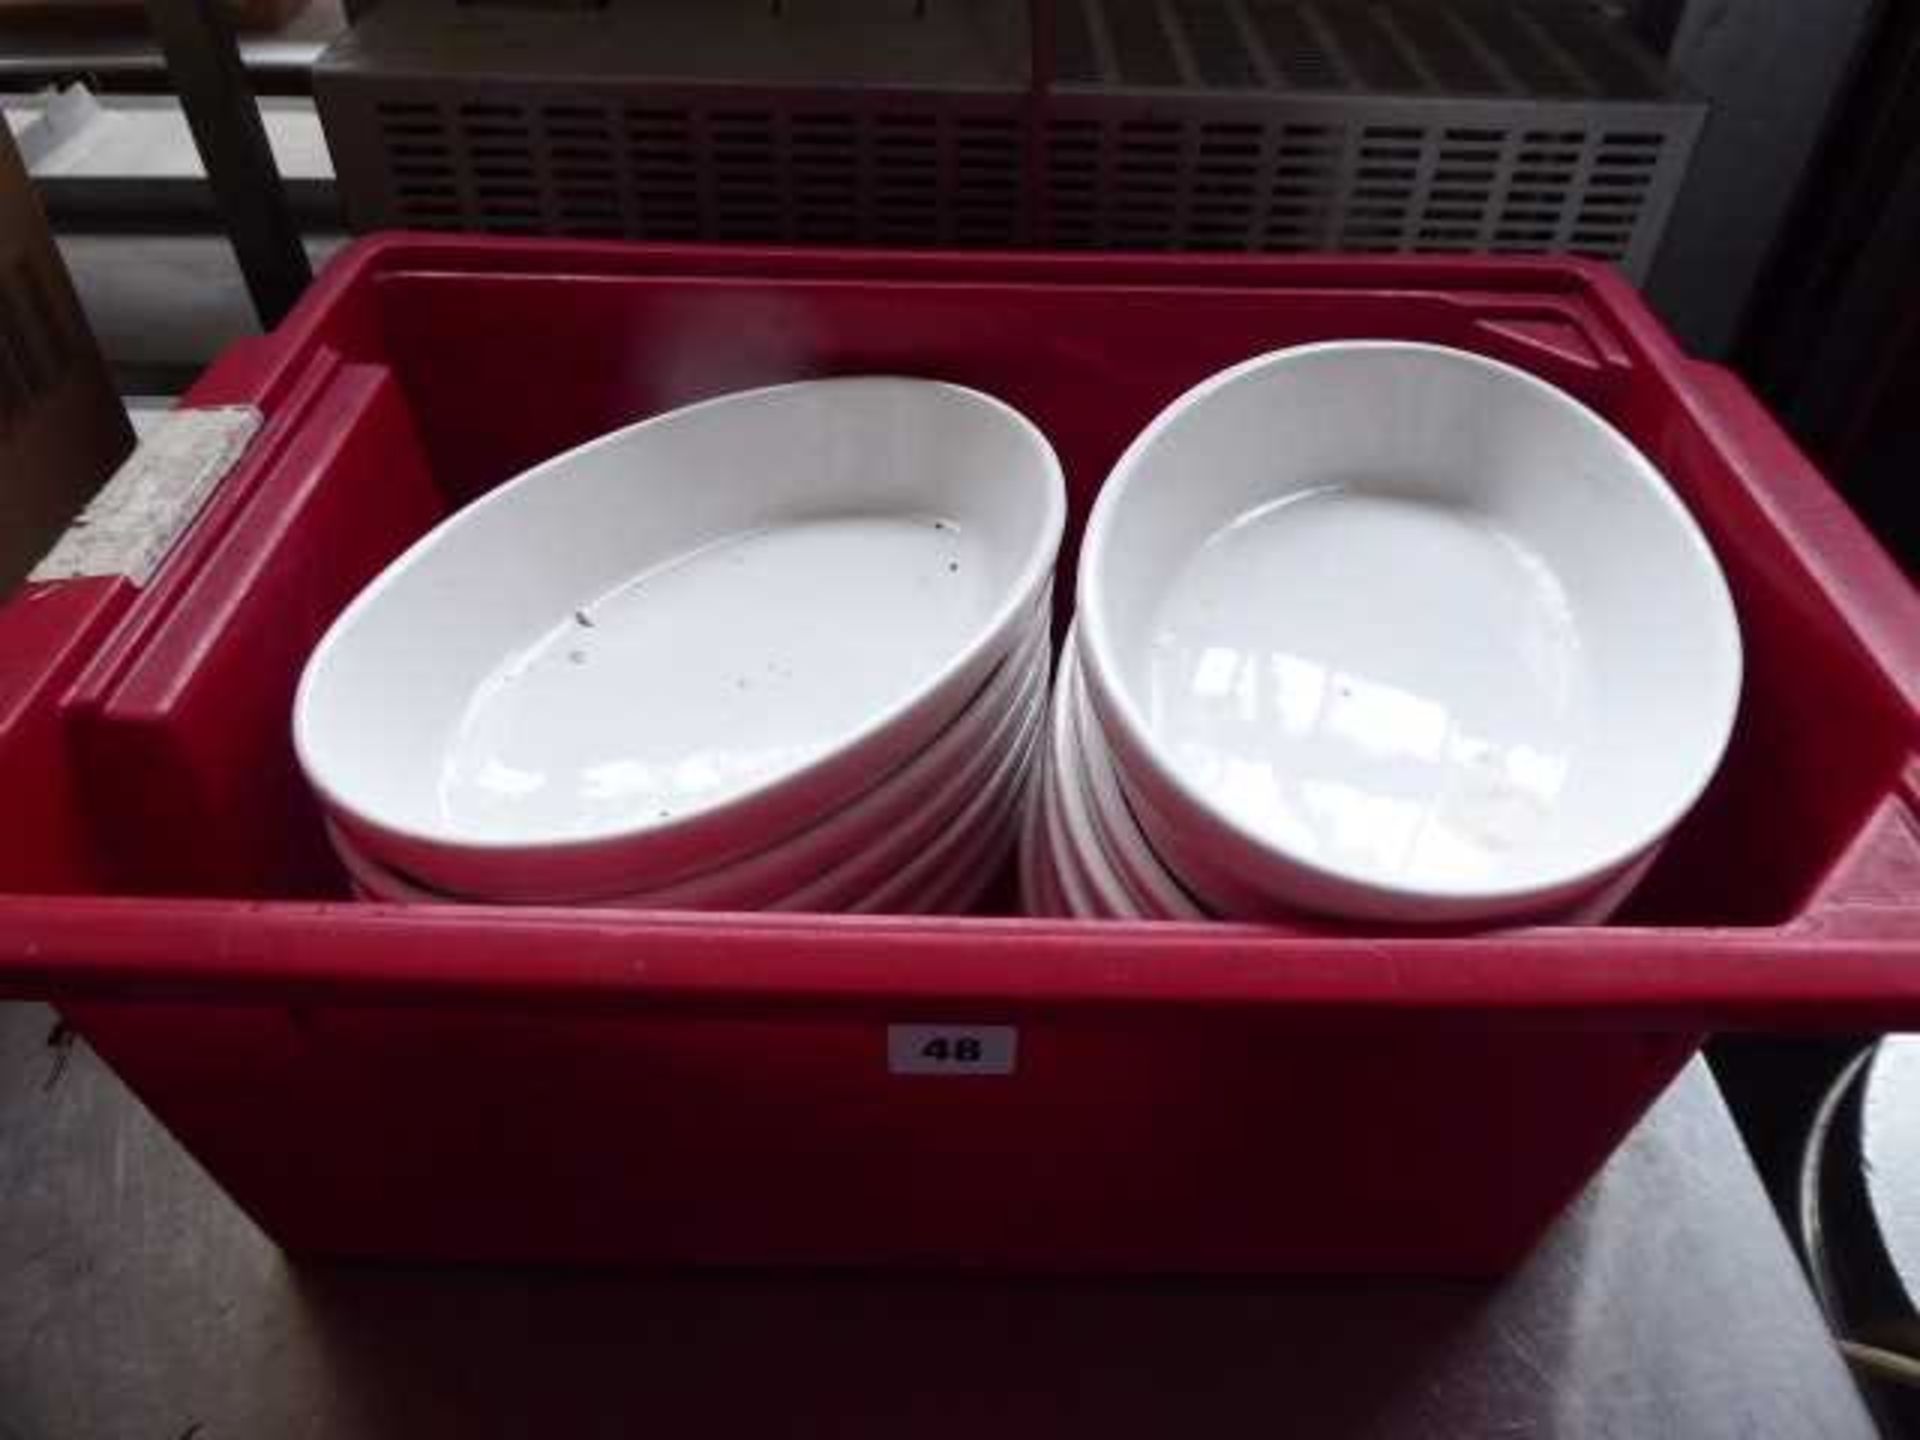 11x 28cm oval serving dishes